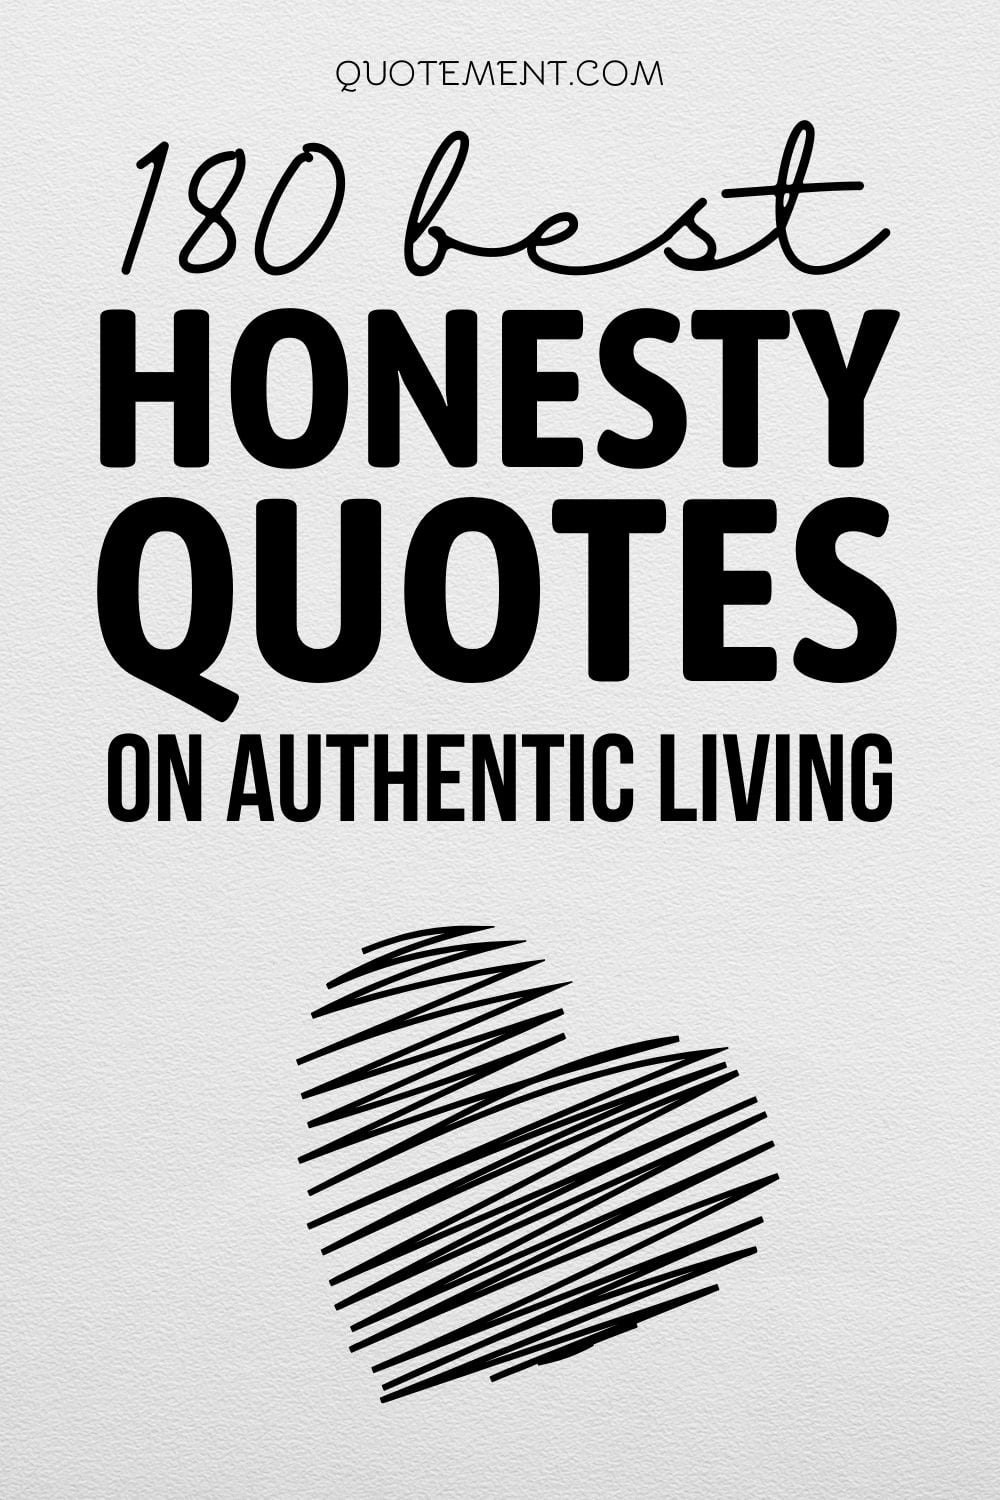 180 Greatest Honesty Quotes To Inspire Authentic Living